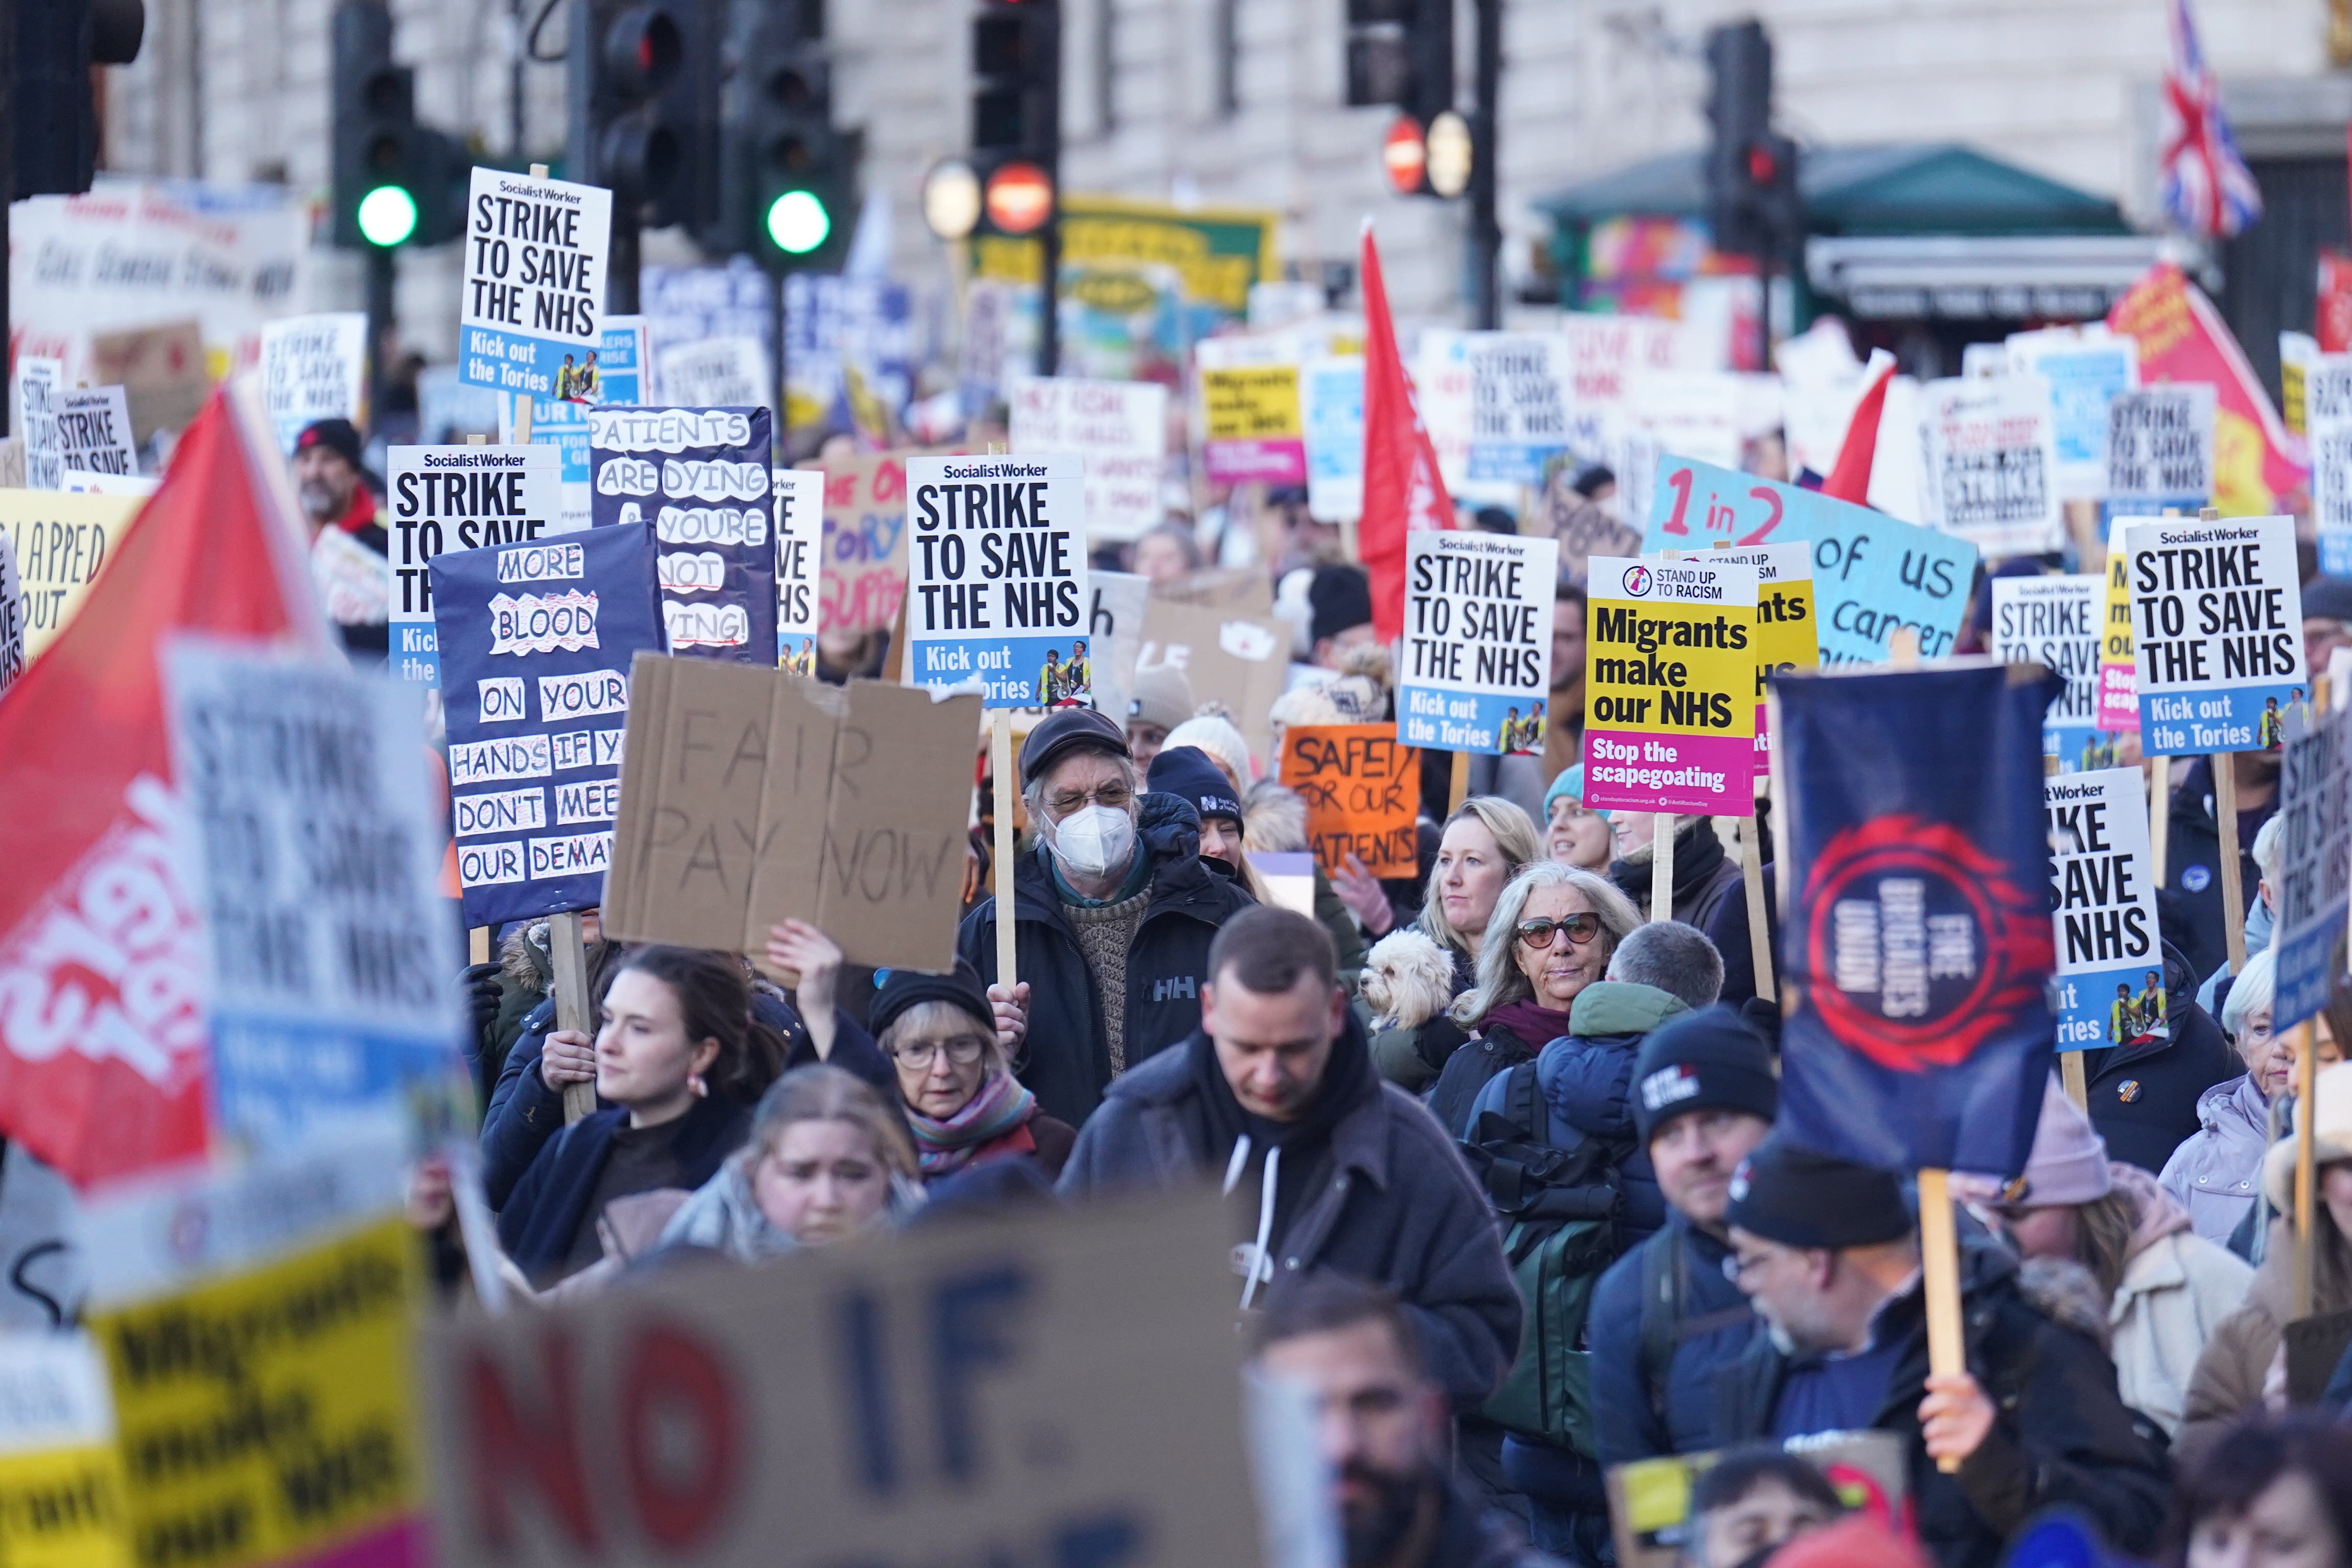 Protesters march through Trafalgar Square during the nurses strike. (James Manning/PA)